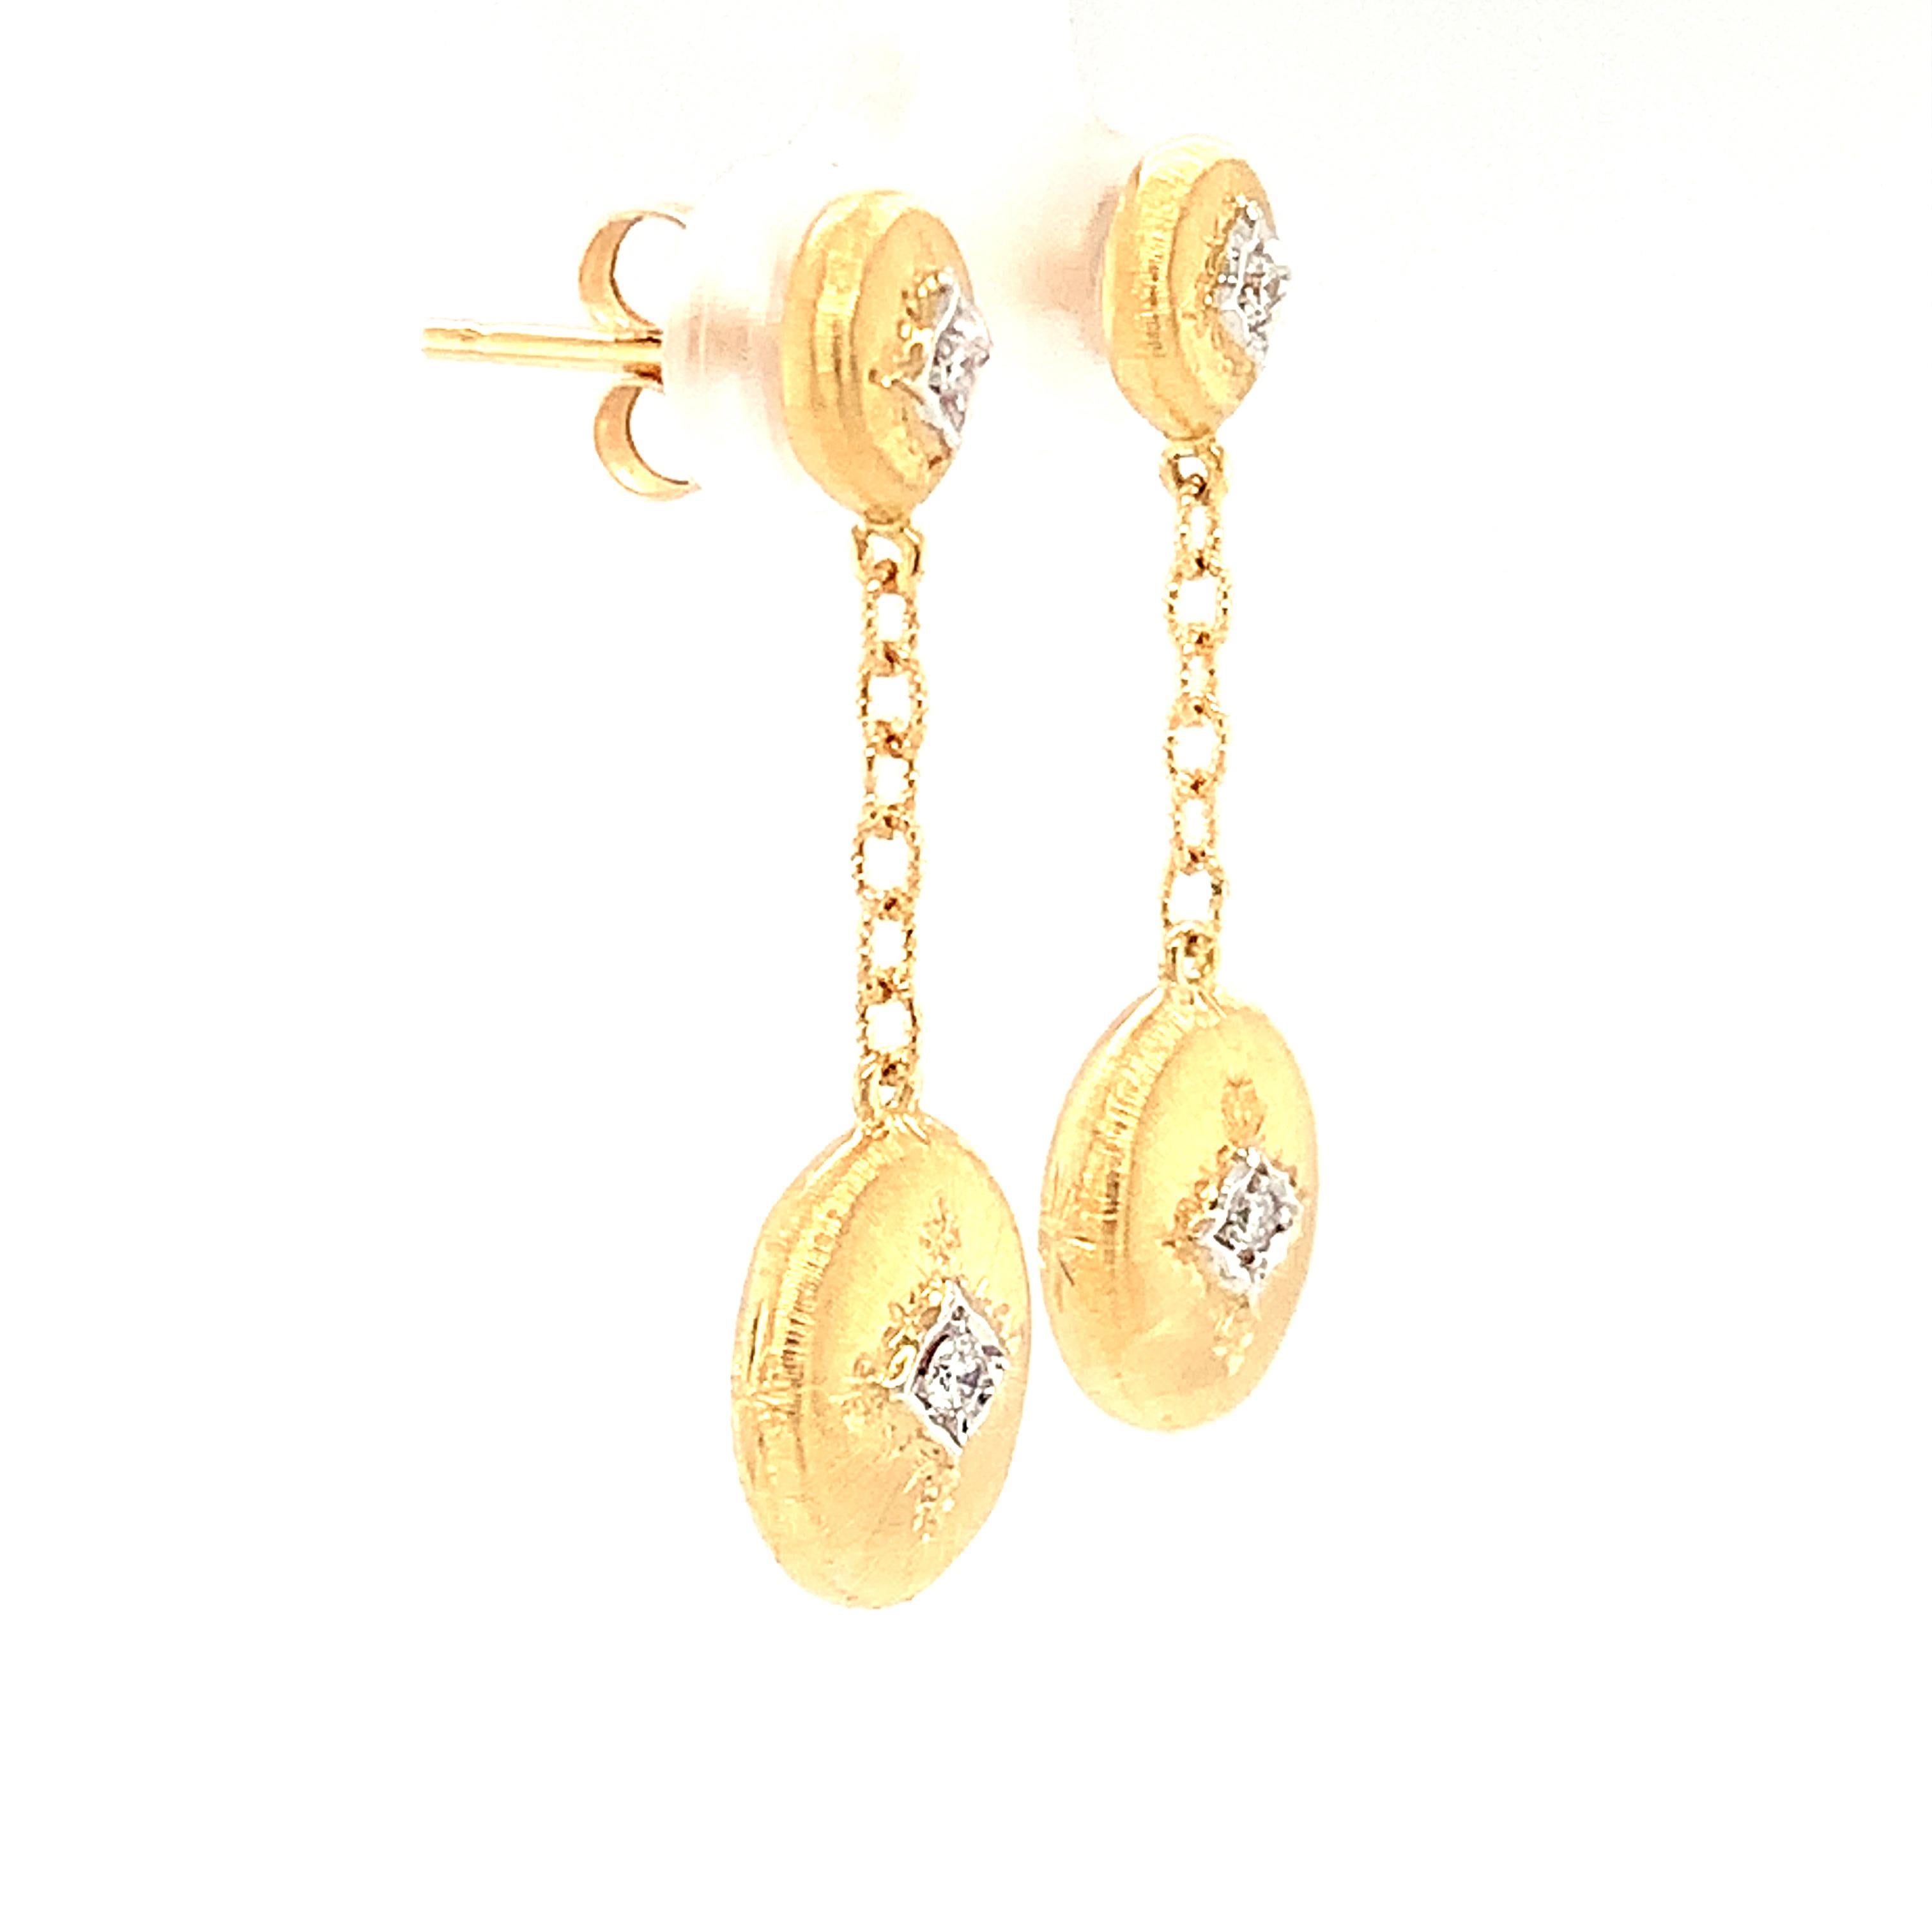 Brilliant Cut Diamond, Yellow and White Gold Florentine Style Dangle Drop Earrings